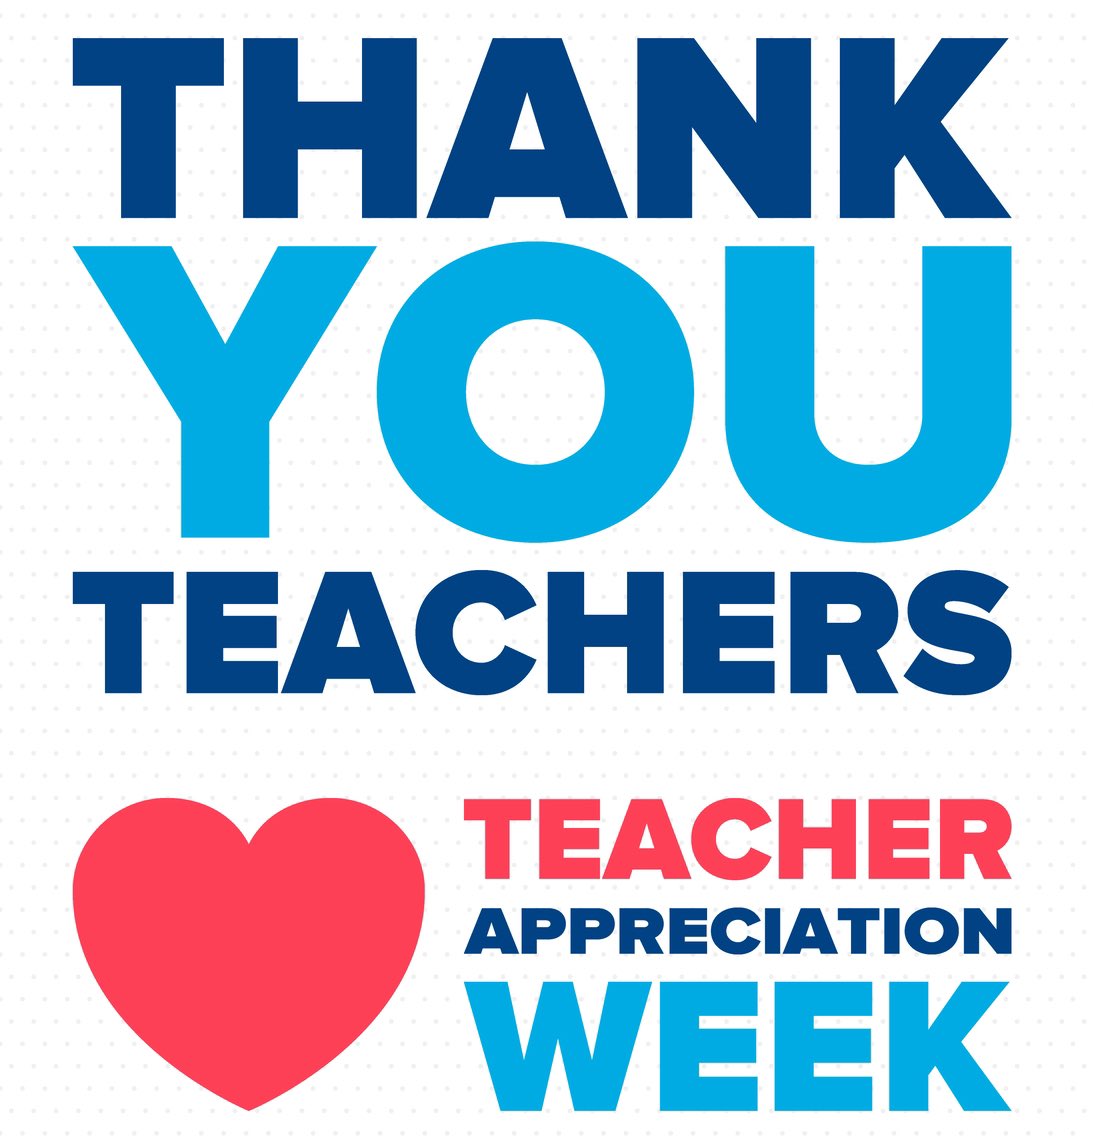 Thank you to all the teachers out there making a positive difference everyday in the lives of scholars, staff, families and communities! We see you! #teacherappreciationweek 

#EdBranding #tellyourstory #BeAConnecter #drrenaebryant4cnusd #dbcincbooks #fitleaders #TLAP #LeadLAP…